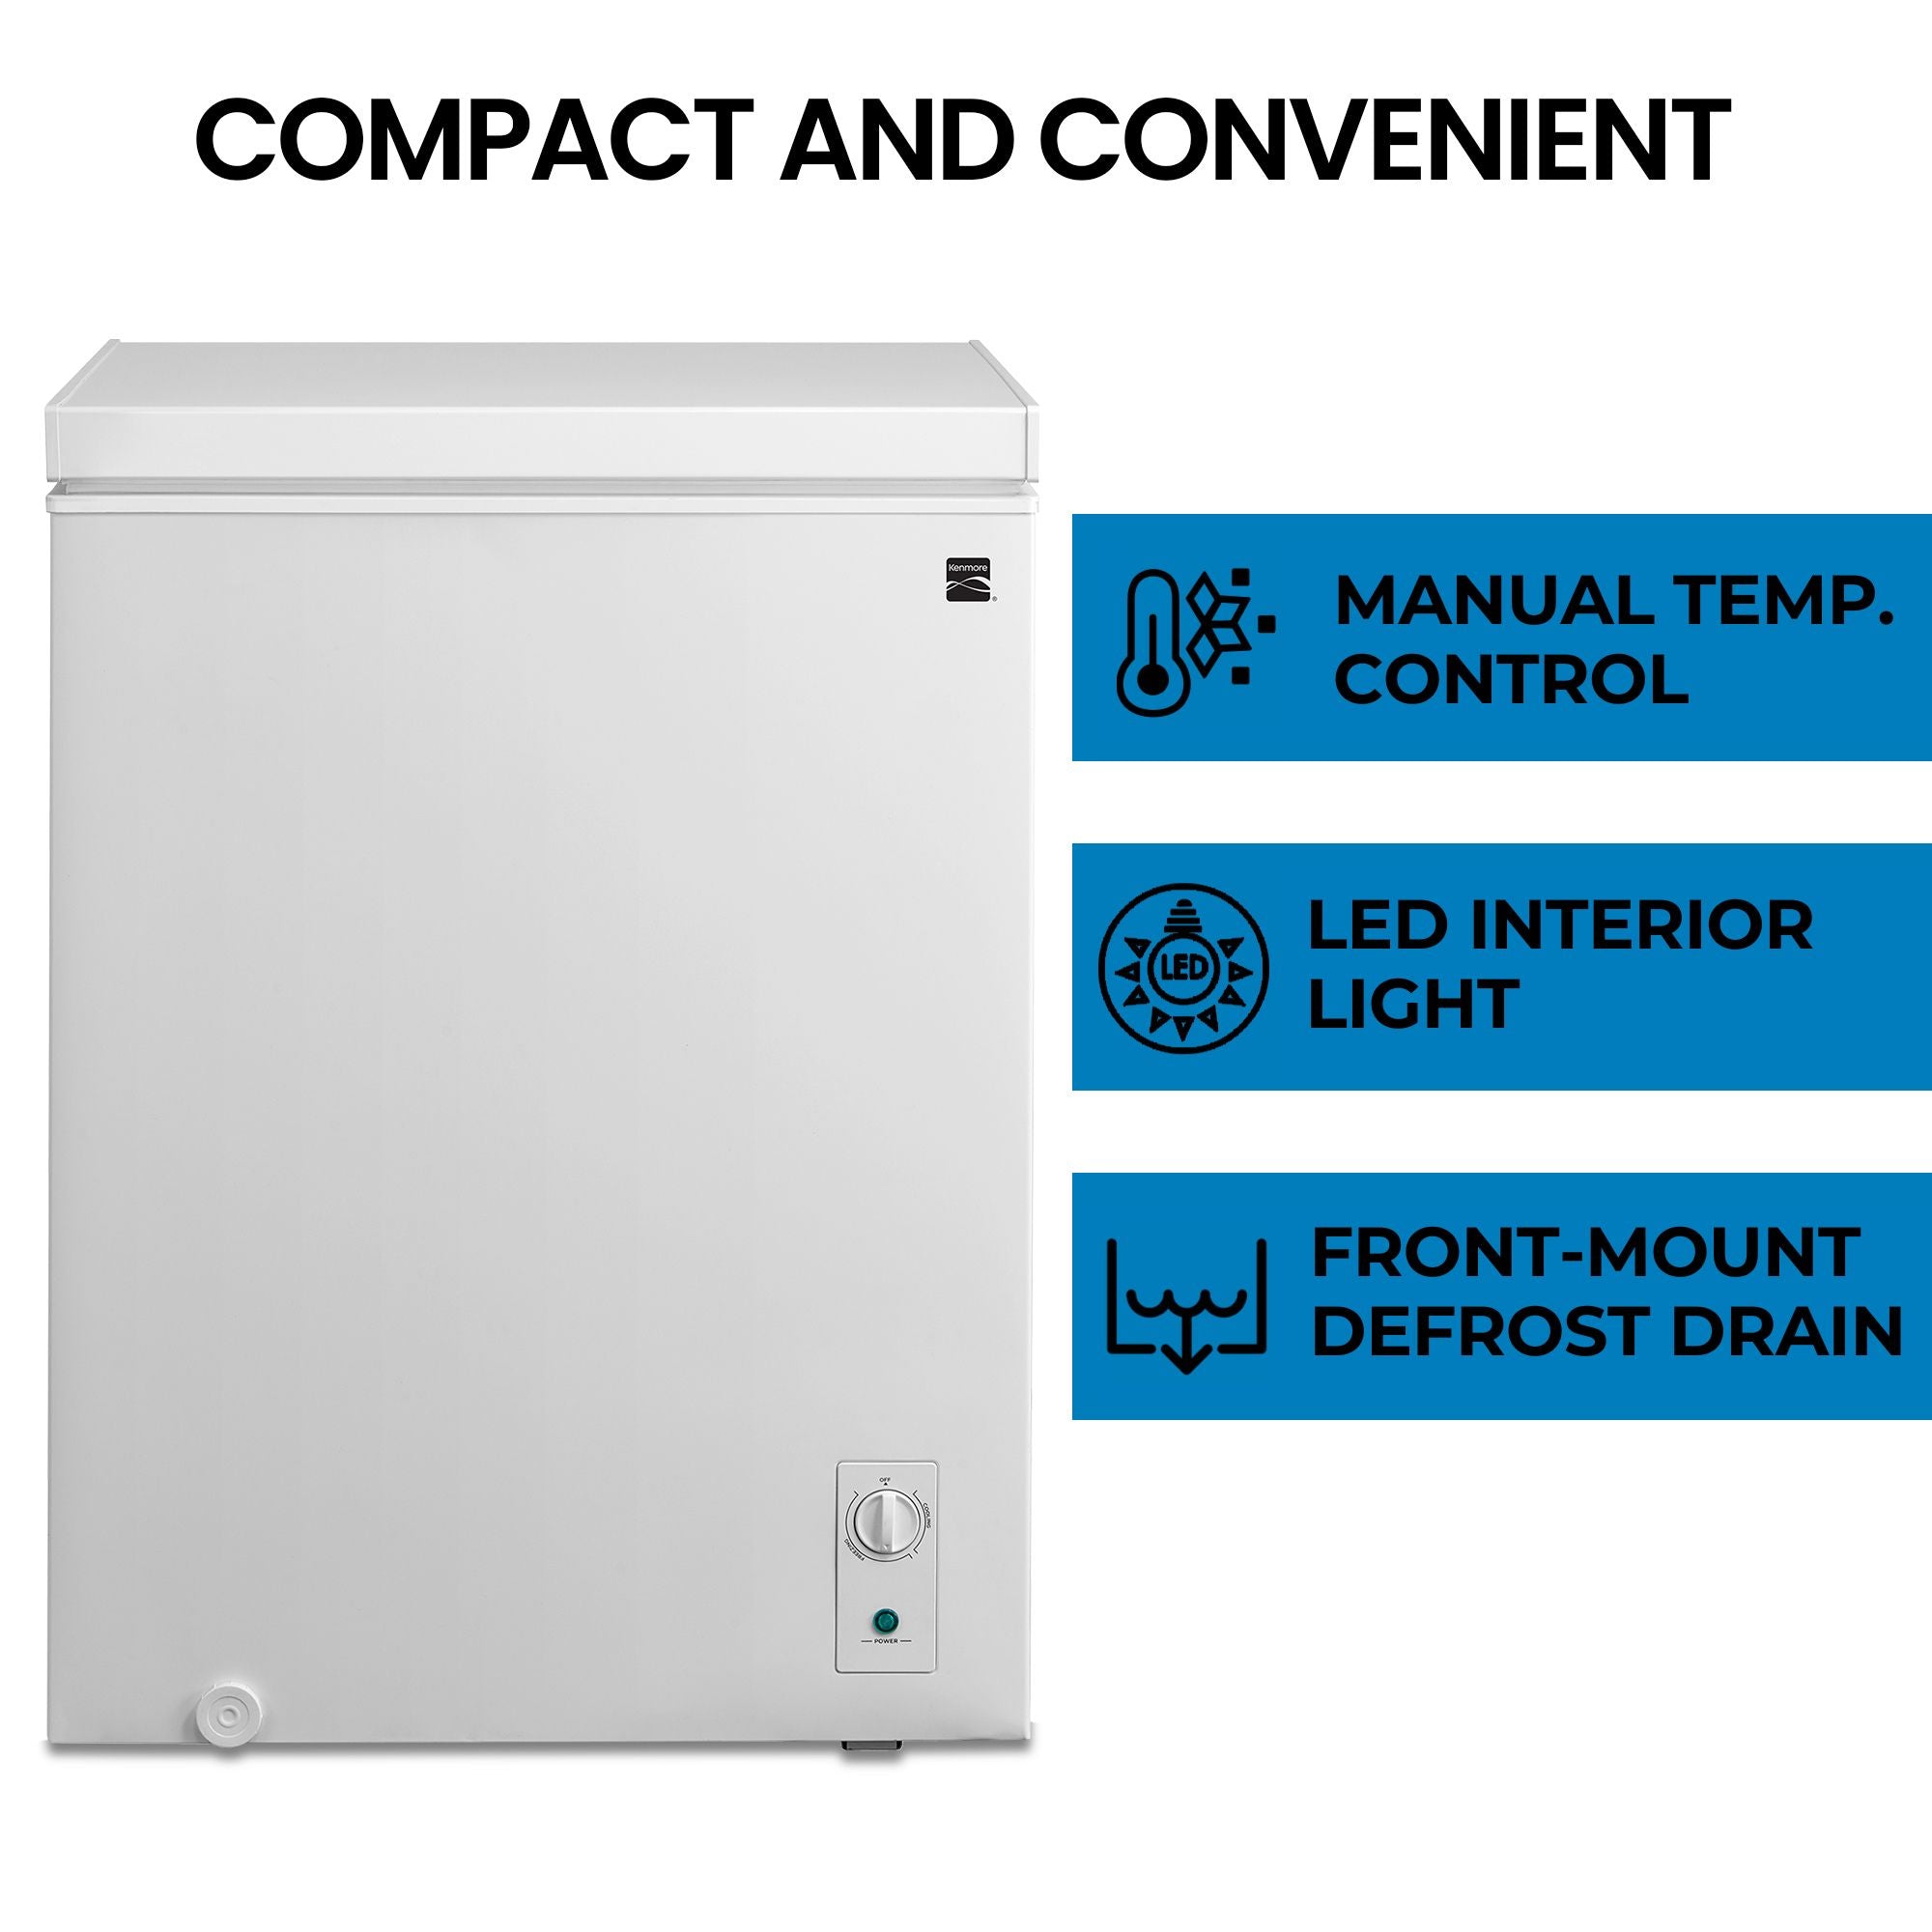 Kenmore chest-style convertible fridge freezer, closed, on a white background with features listed to the right: Manual temp. control; garage ready; Front-mount defrost drain. Text above reads, "Compact and convenient"